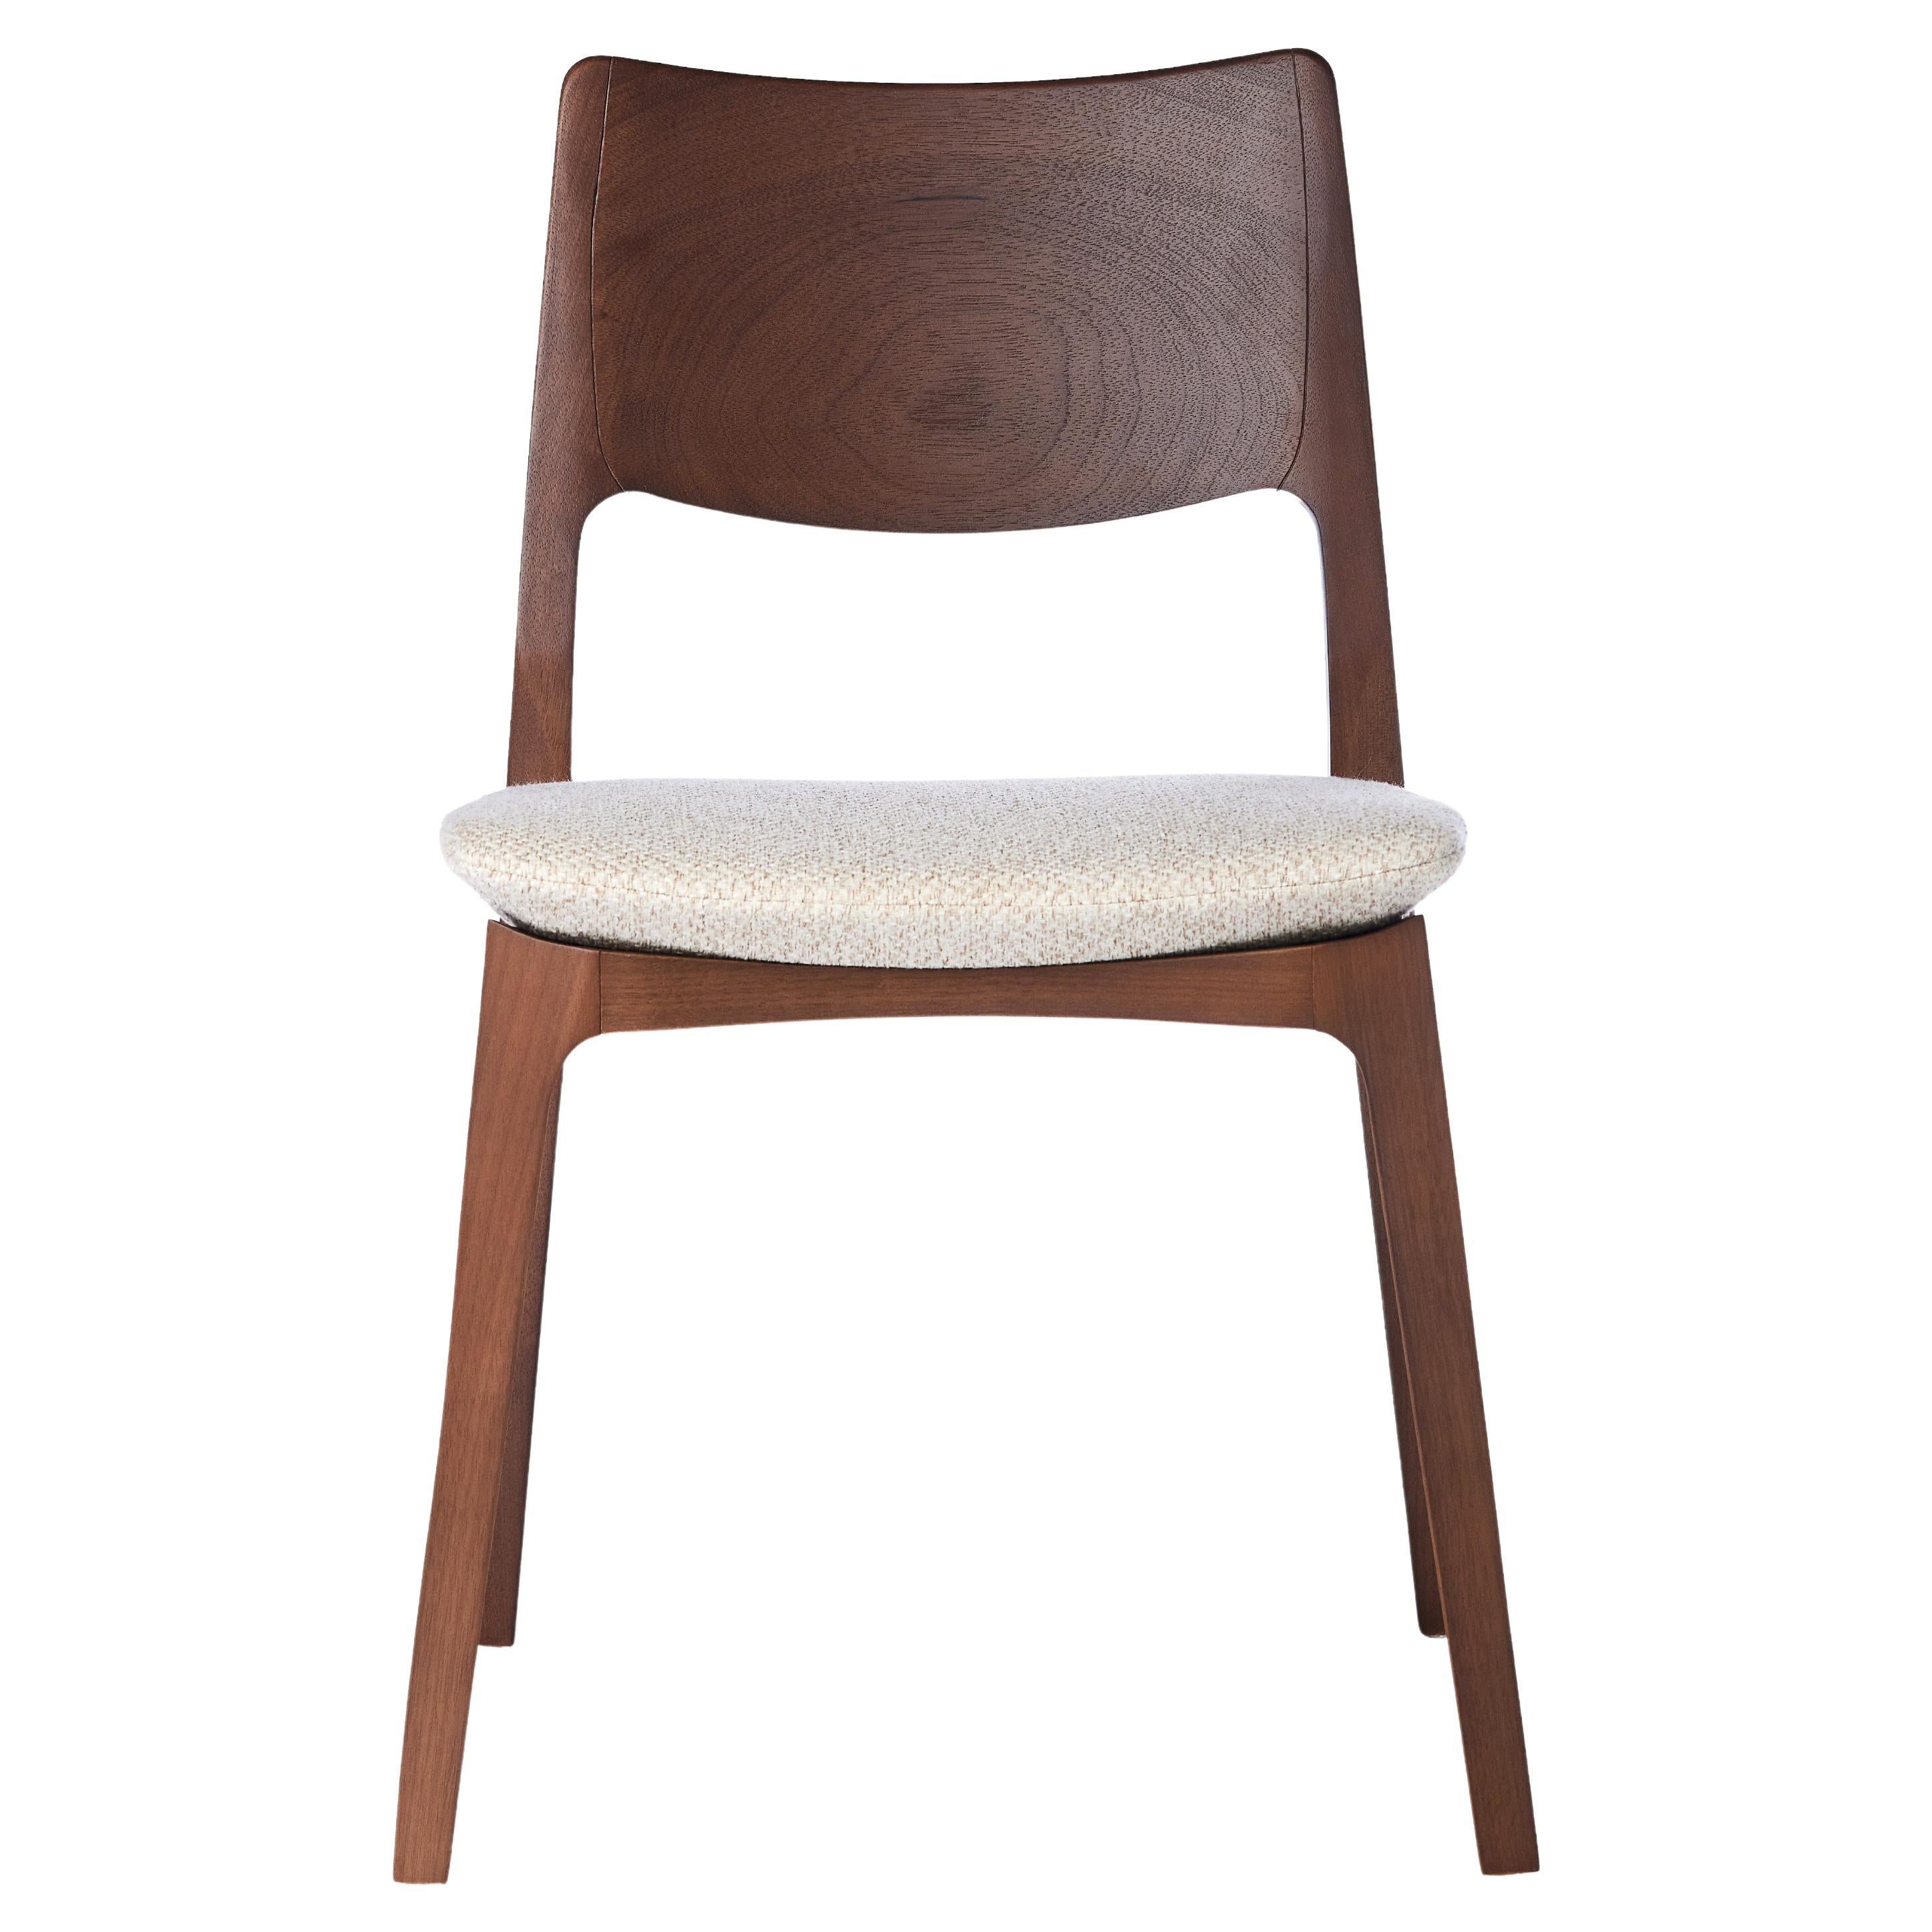 Modern Style Aurora Chair Sculpted in Walnut Finish No Arms, Upholstered Seat For Sale